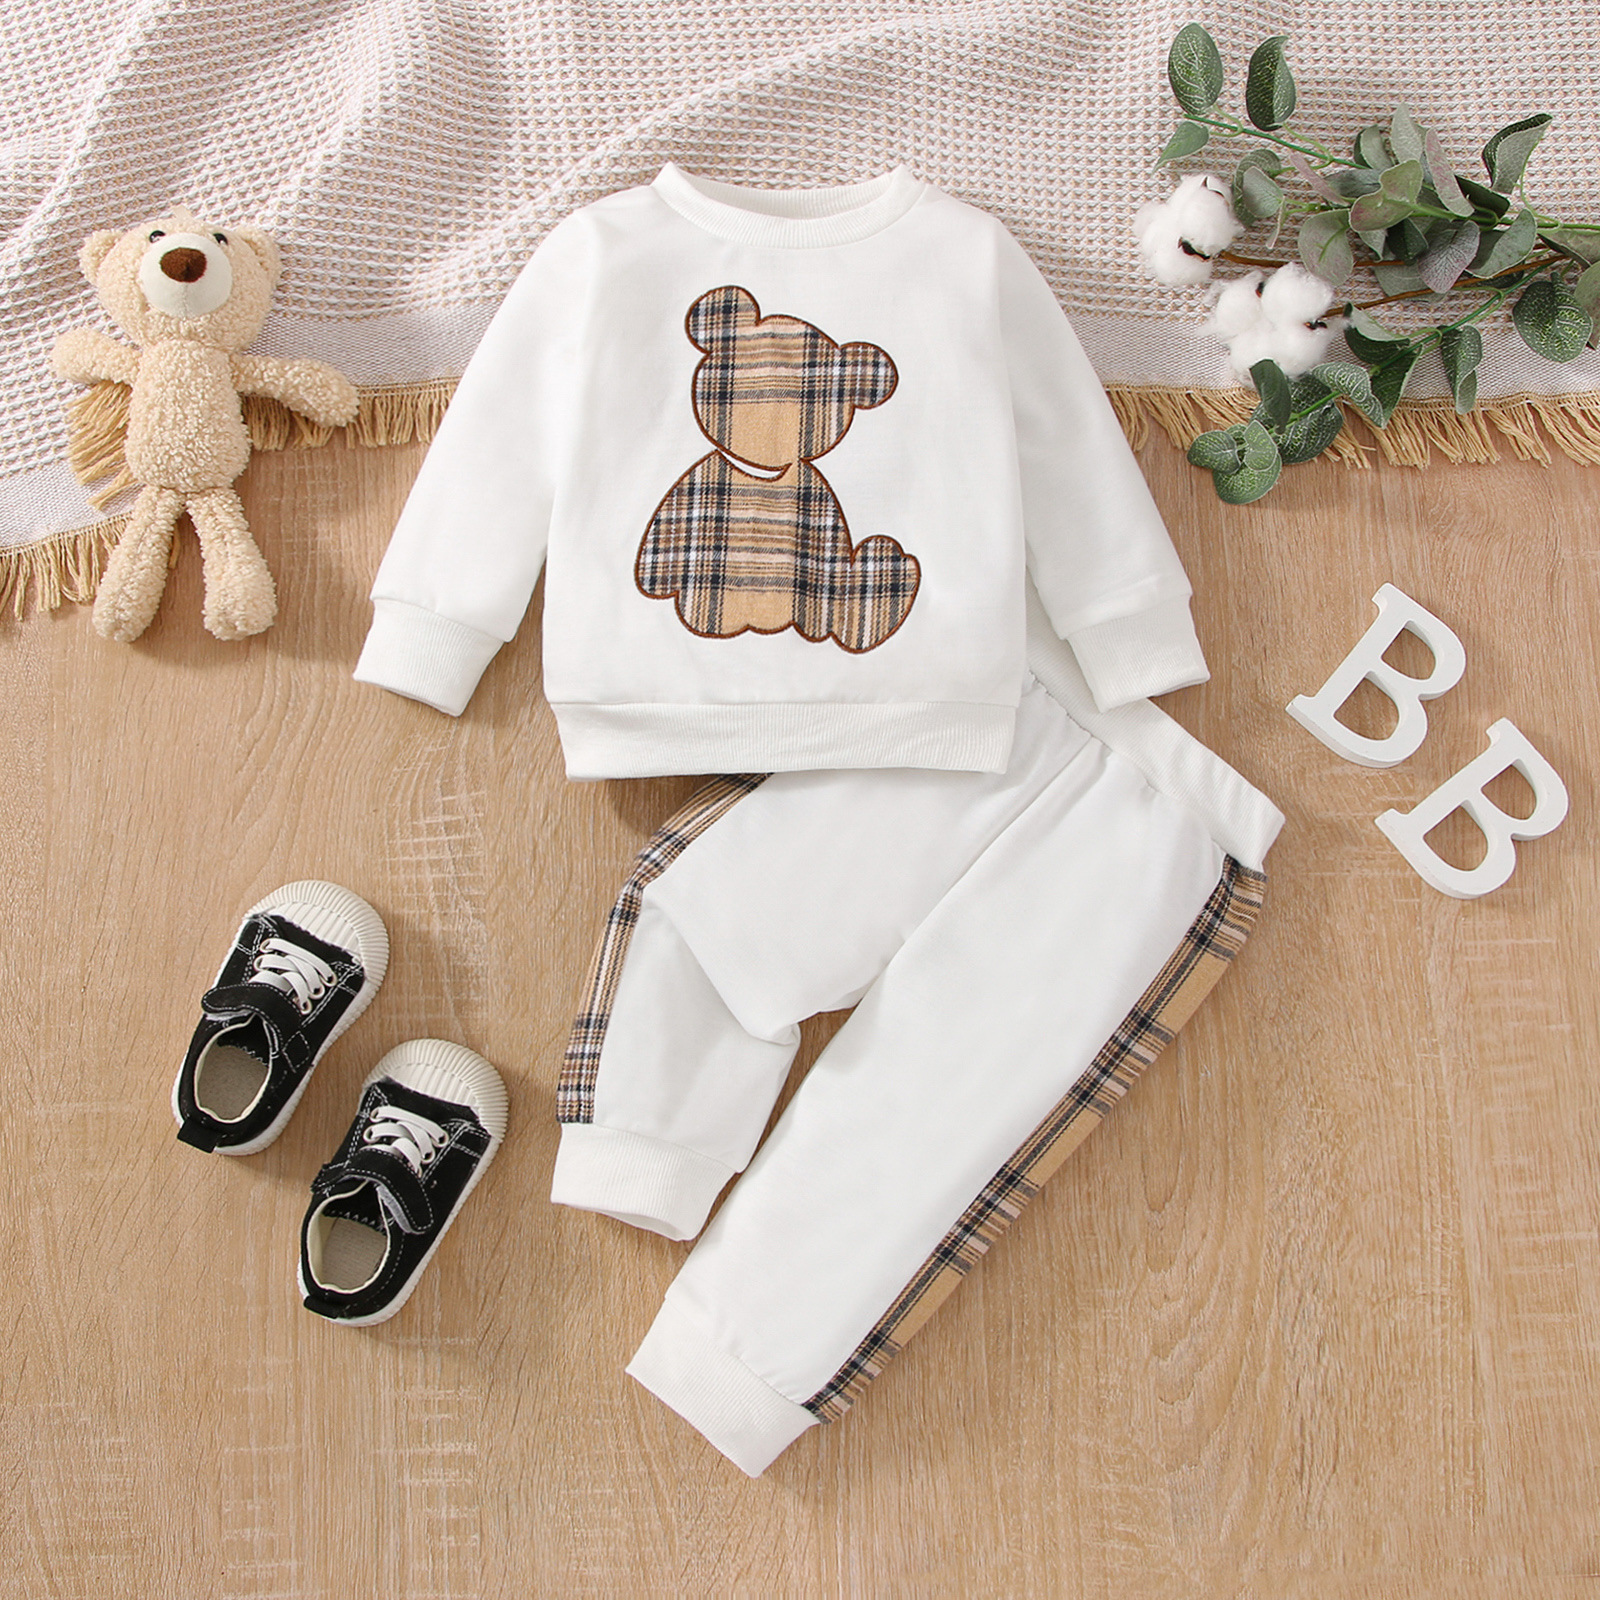 Baby Girls Autumn Clothing Sets Newborn Toddler Long Sleeve Plaid Bear Pattern Tops Sweatshirt Pants Outfits Tracksuits 0-24M